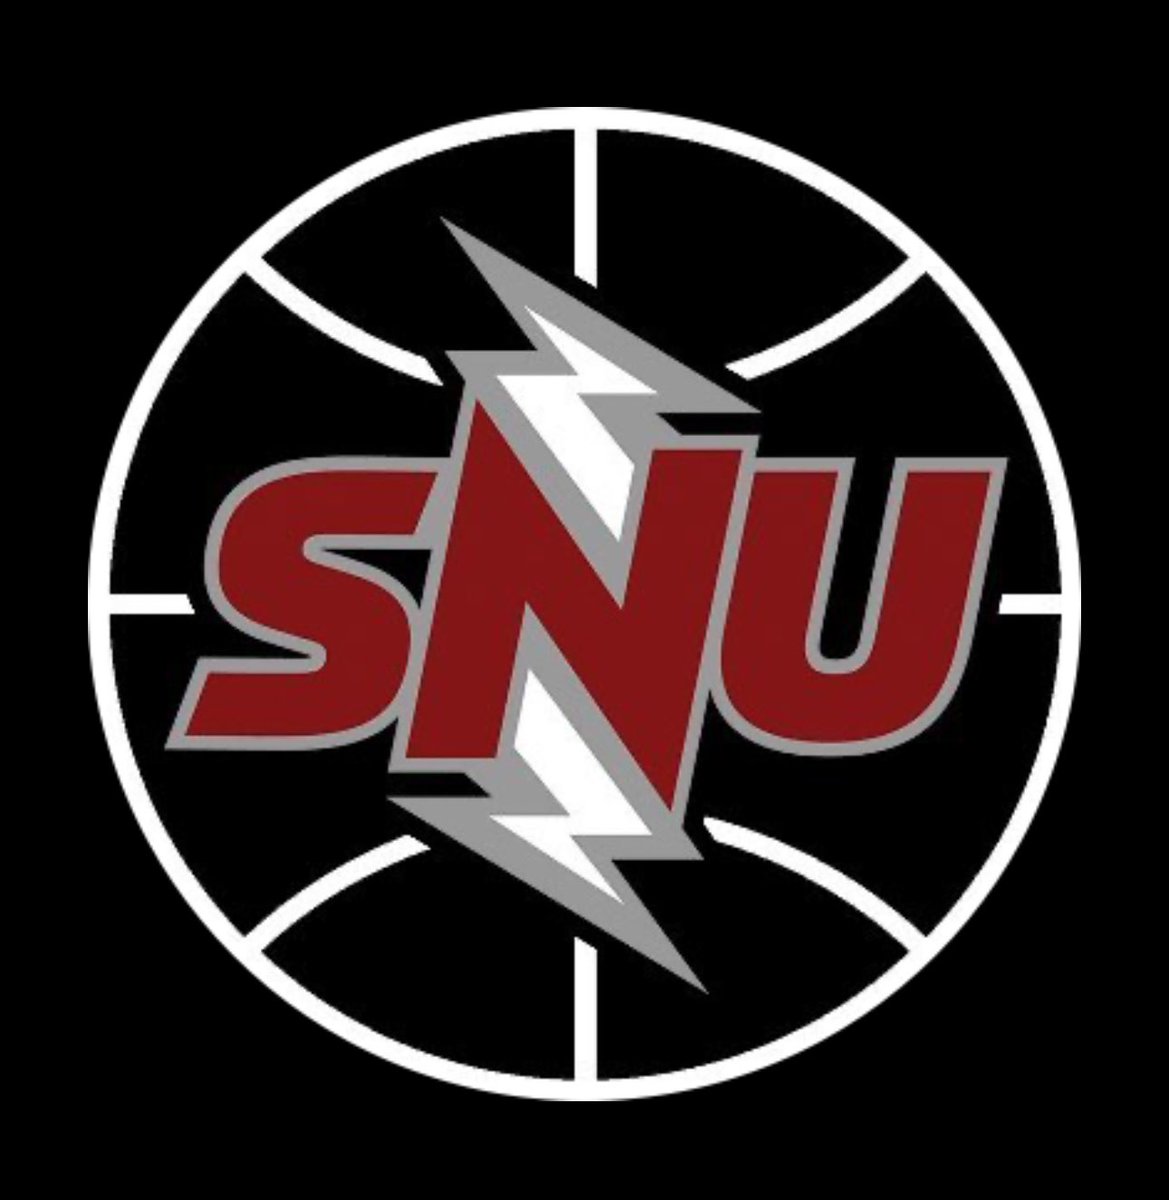 Thankful for an awesome conversation with Coach Foster and learning about the program and opportunities at Southern Nazarene University! @SNUMBB